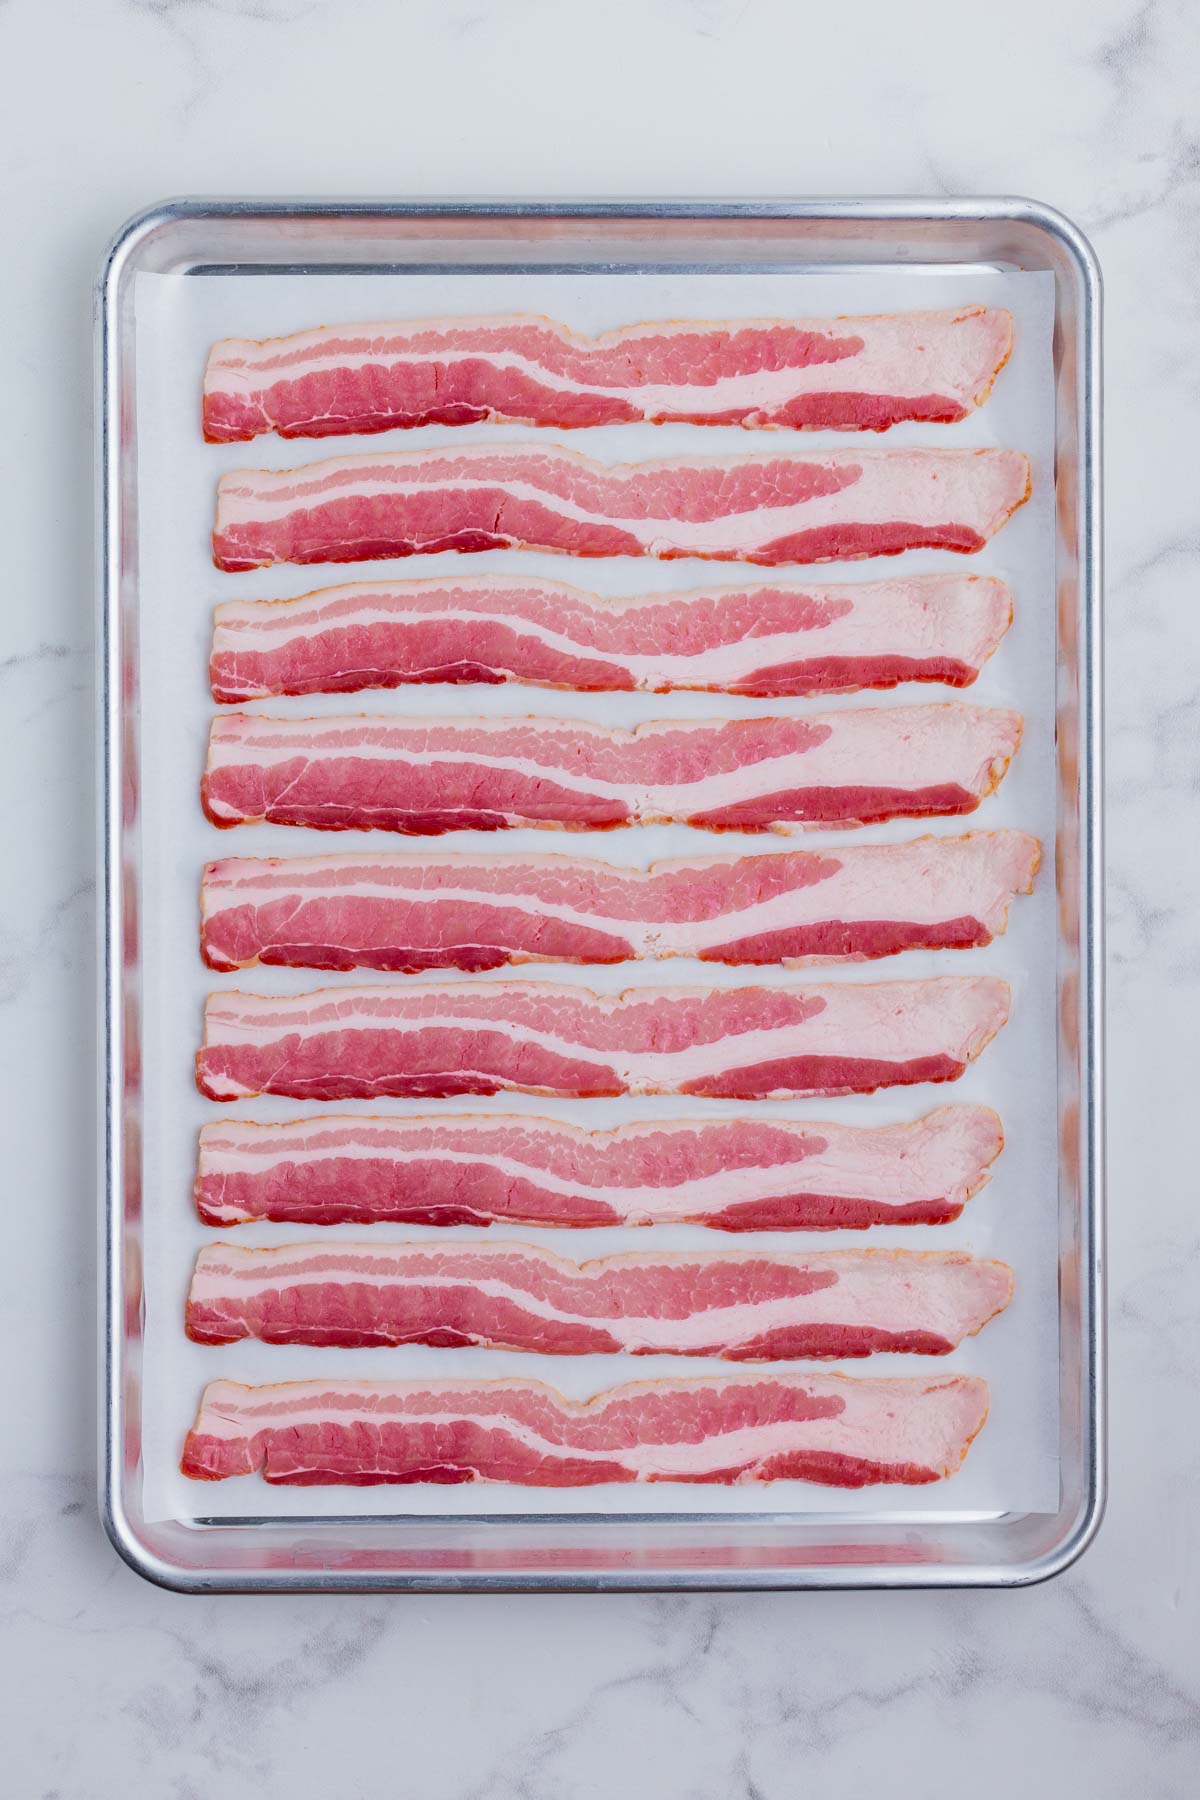 Raw bacon is lined up on a baking sheet lined with parchment paper.